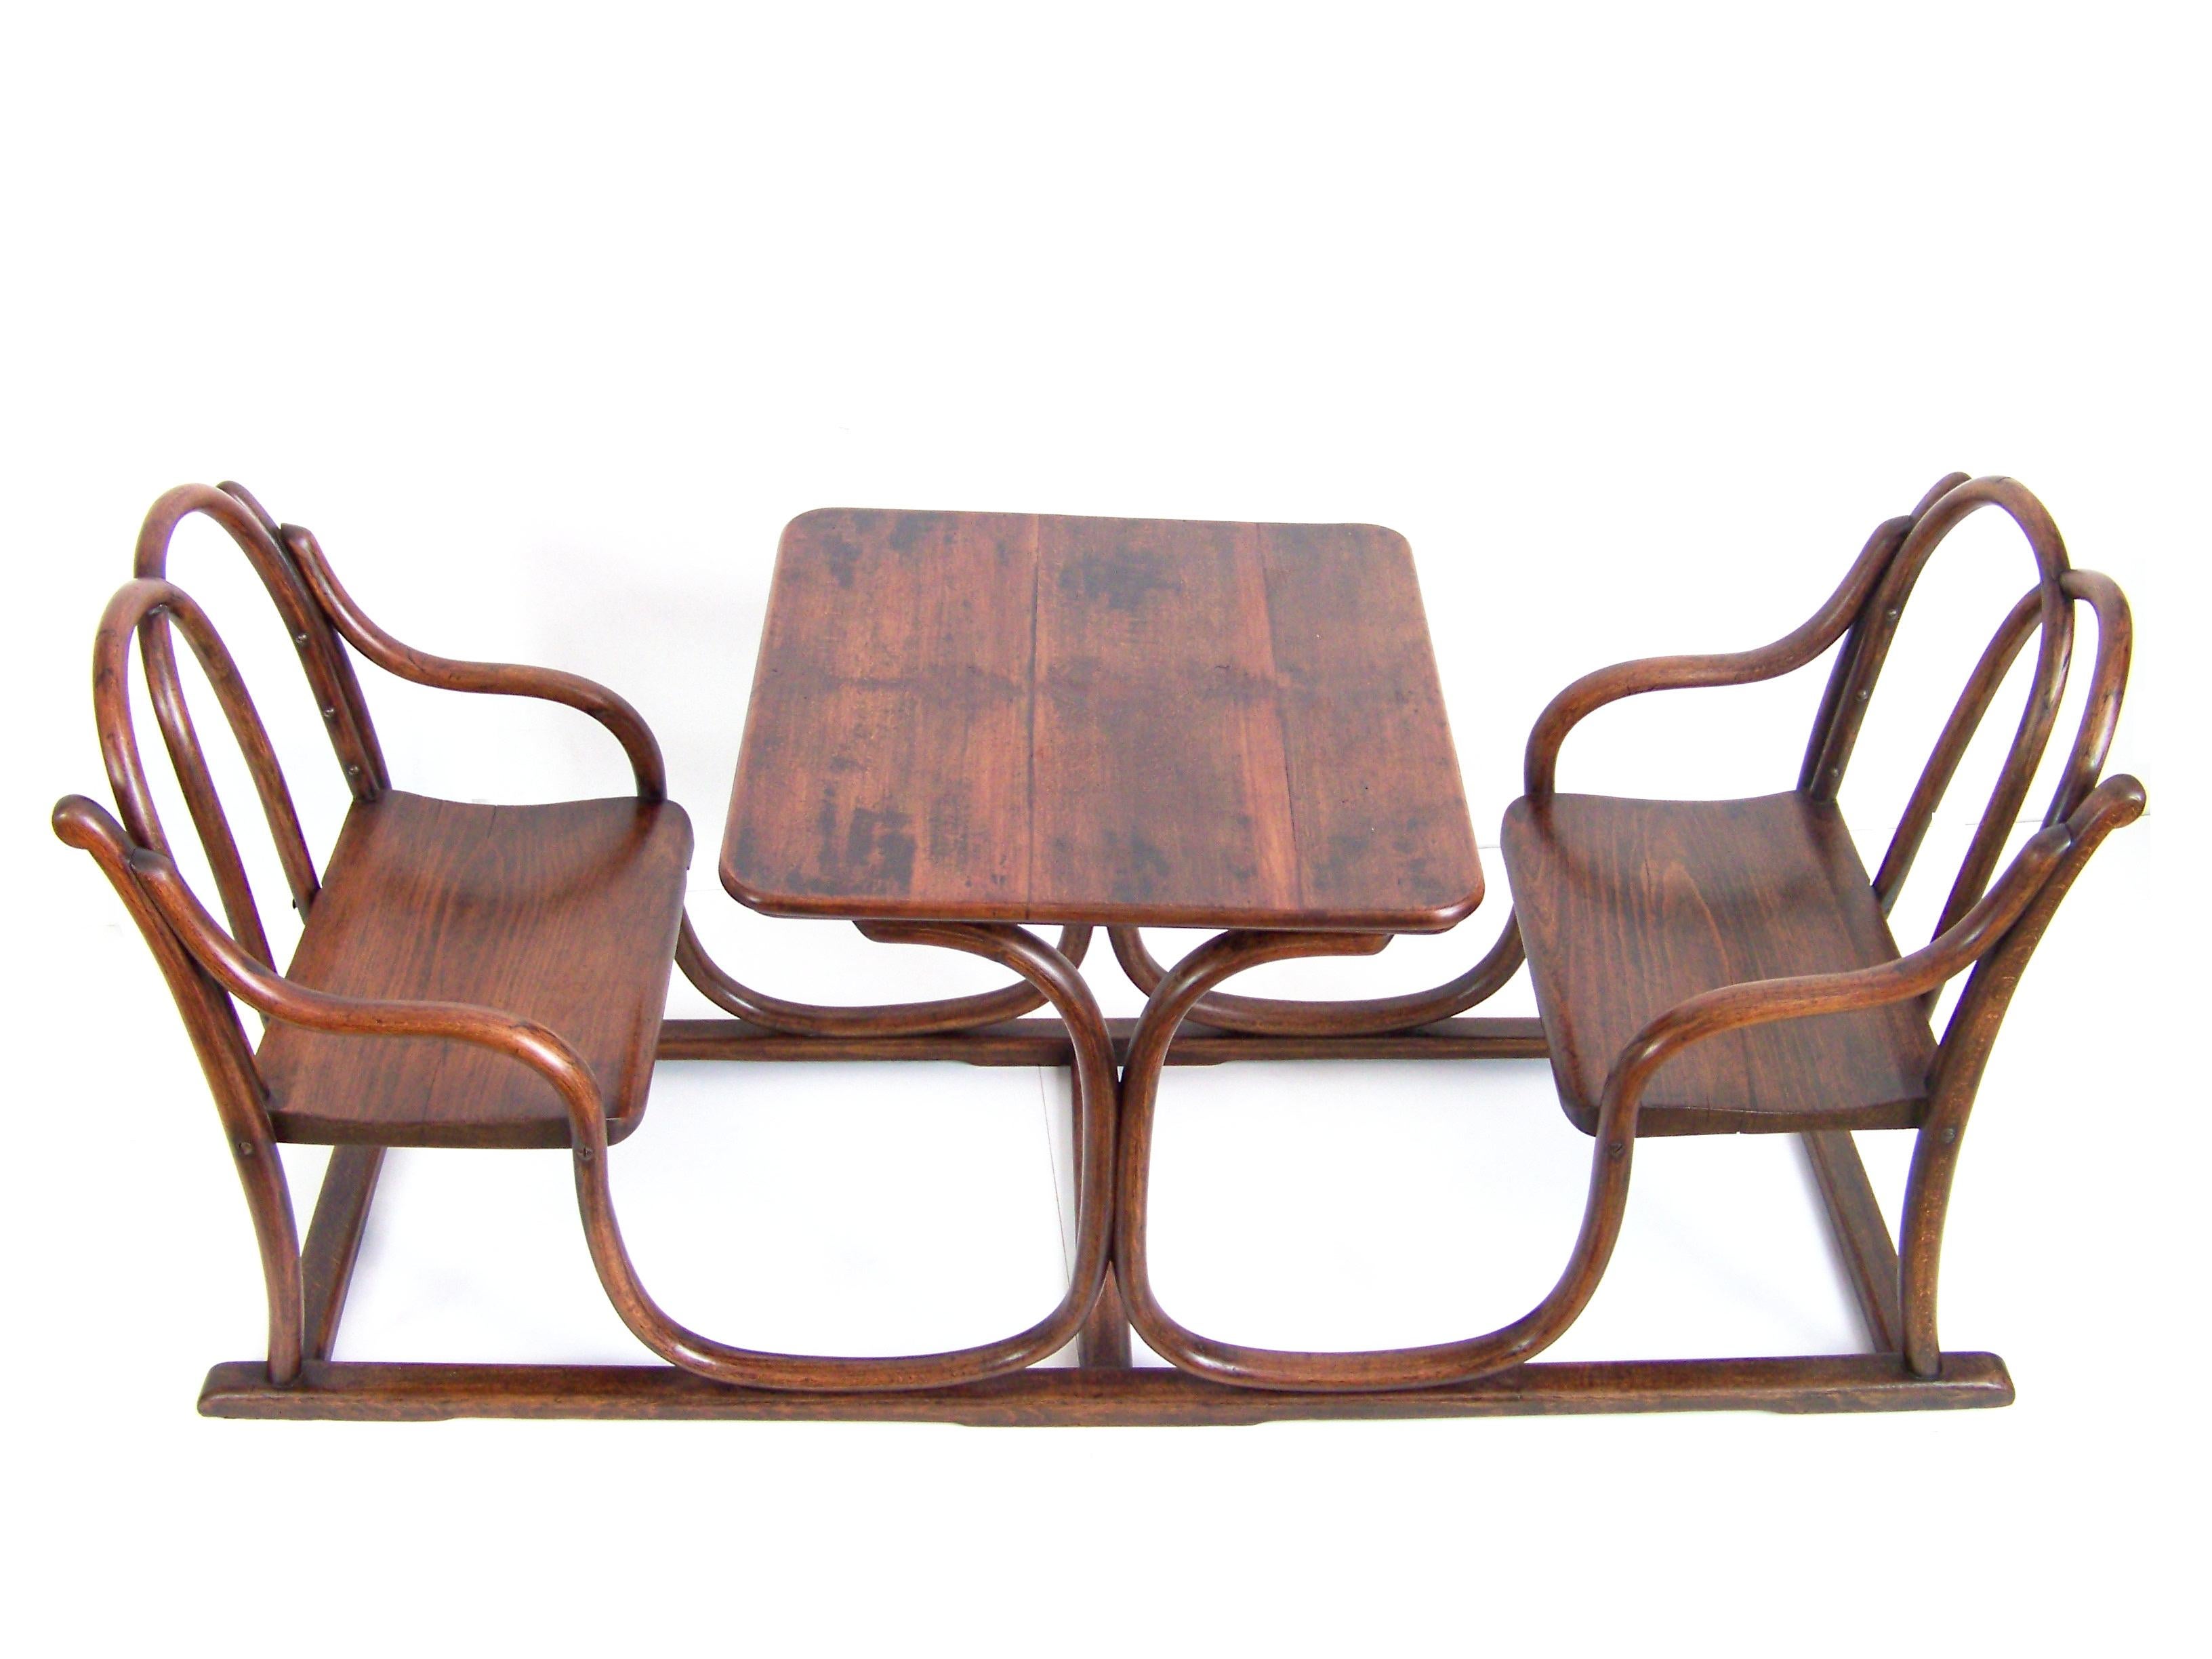 A rare very early model Nr. 3 manufactured in Austria by the Gebrüder Thonet Company. Marked with paper label and stamp, which is used, circa 1860. Newly restored.